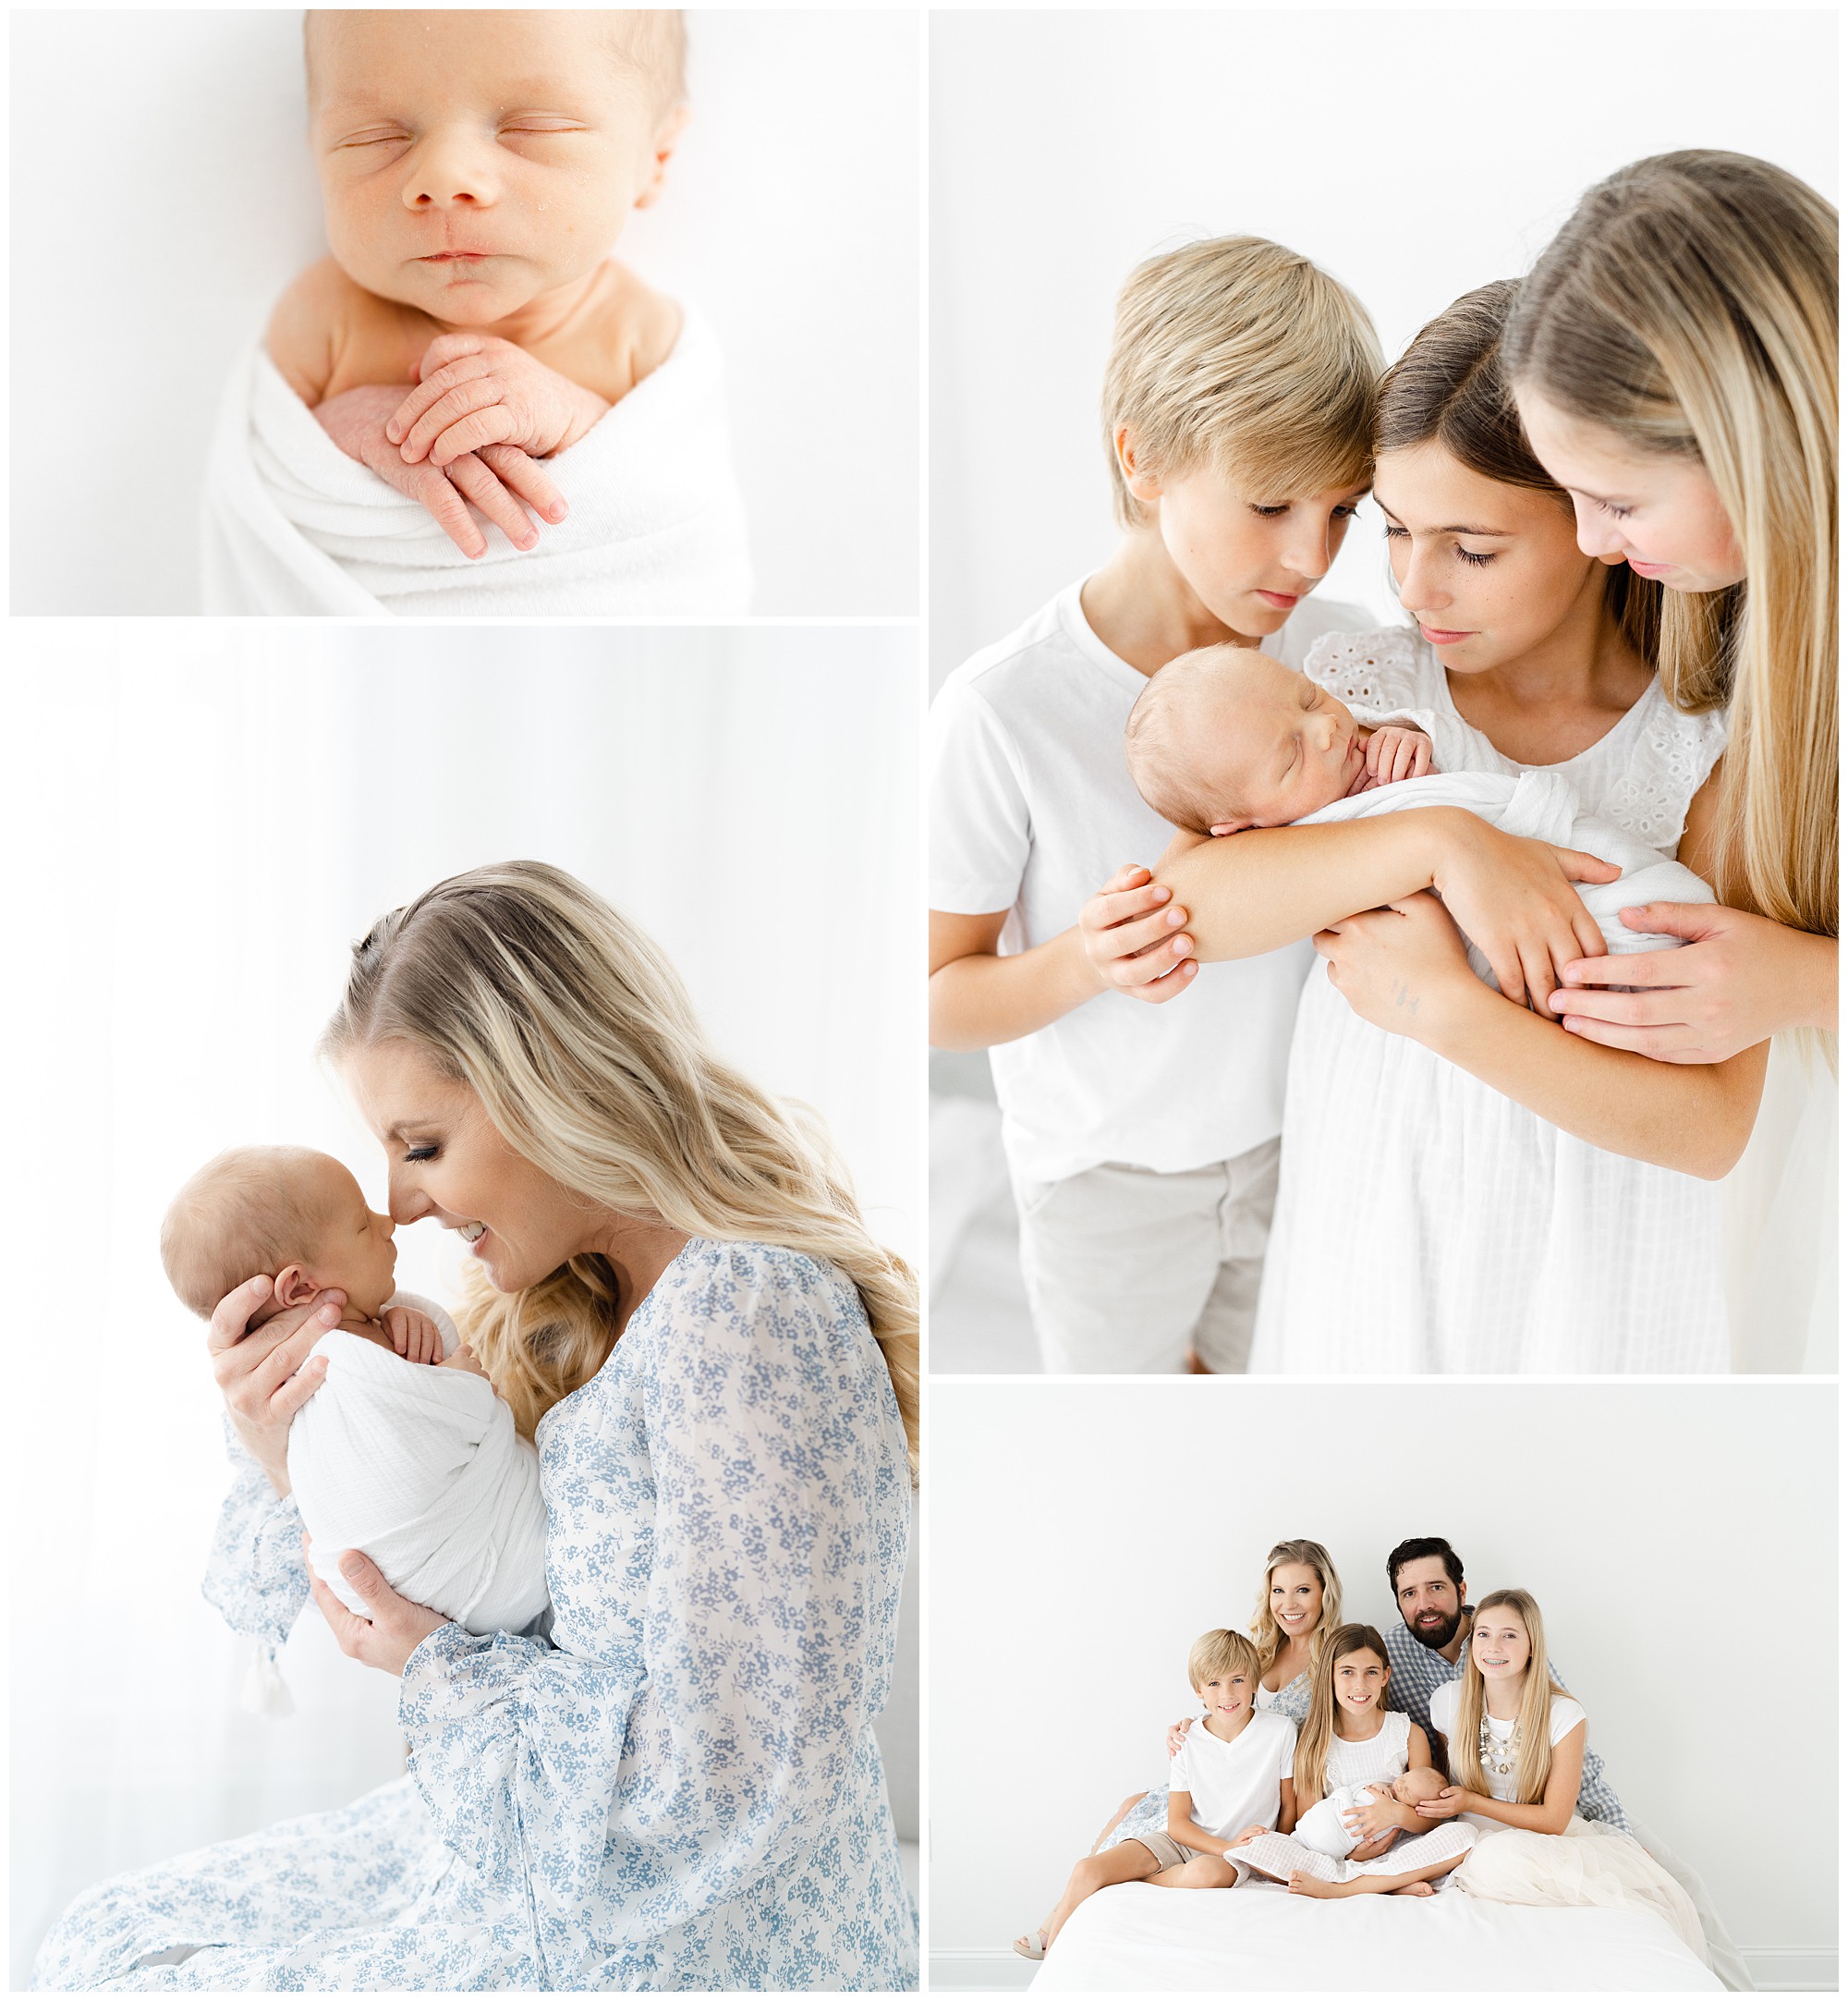 Image collage of a family with three older children and a newborn baby during a photo session with Atlanta newborn photographer Lindsey Powell.